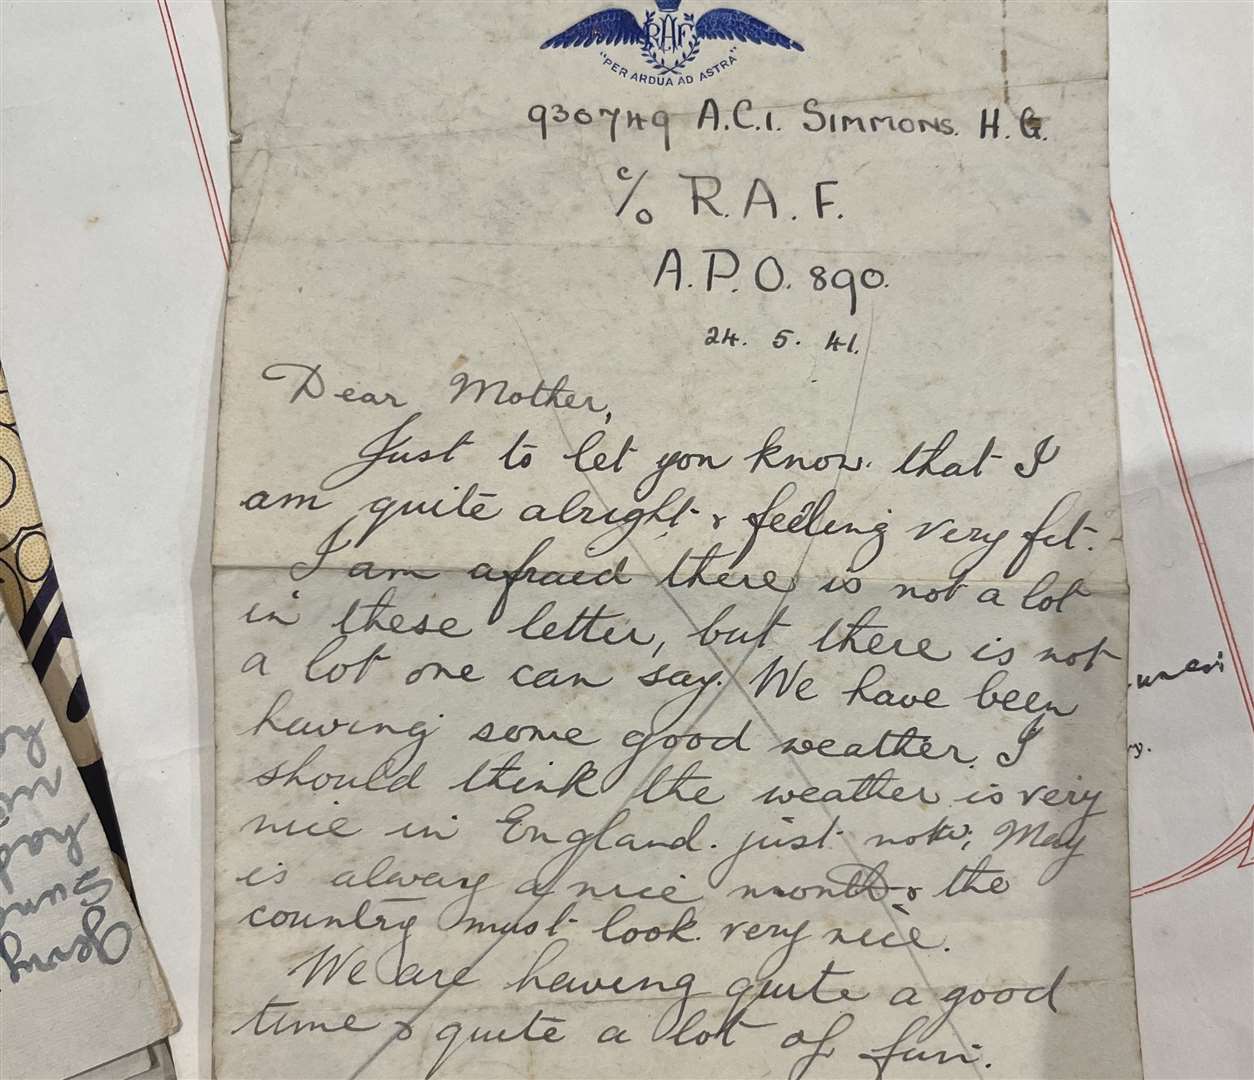 A letter written on May 24, 1941 to Henry's mother